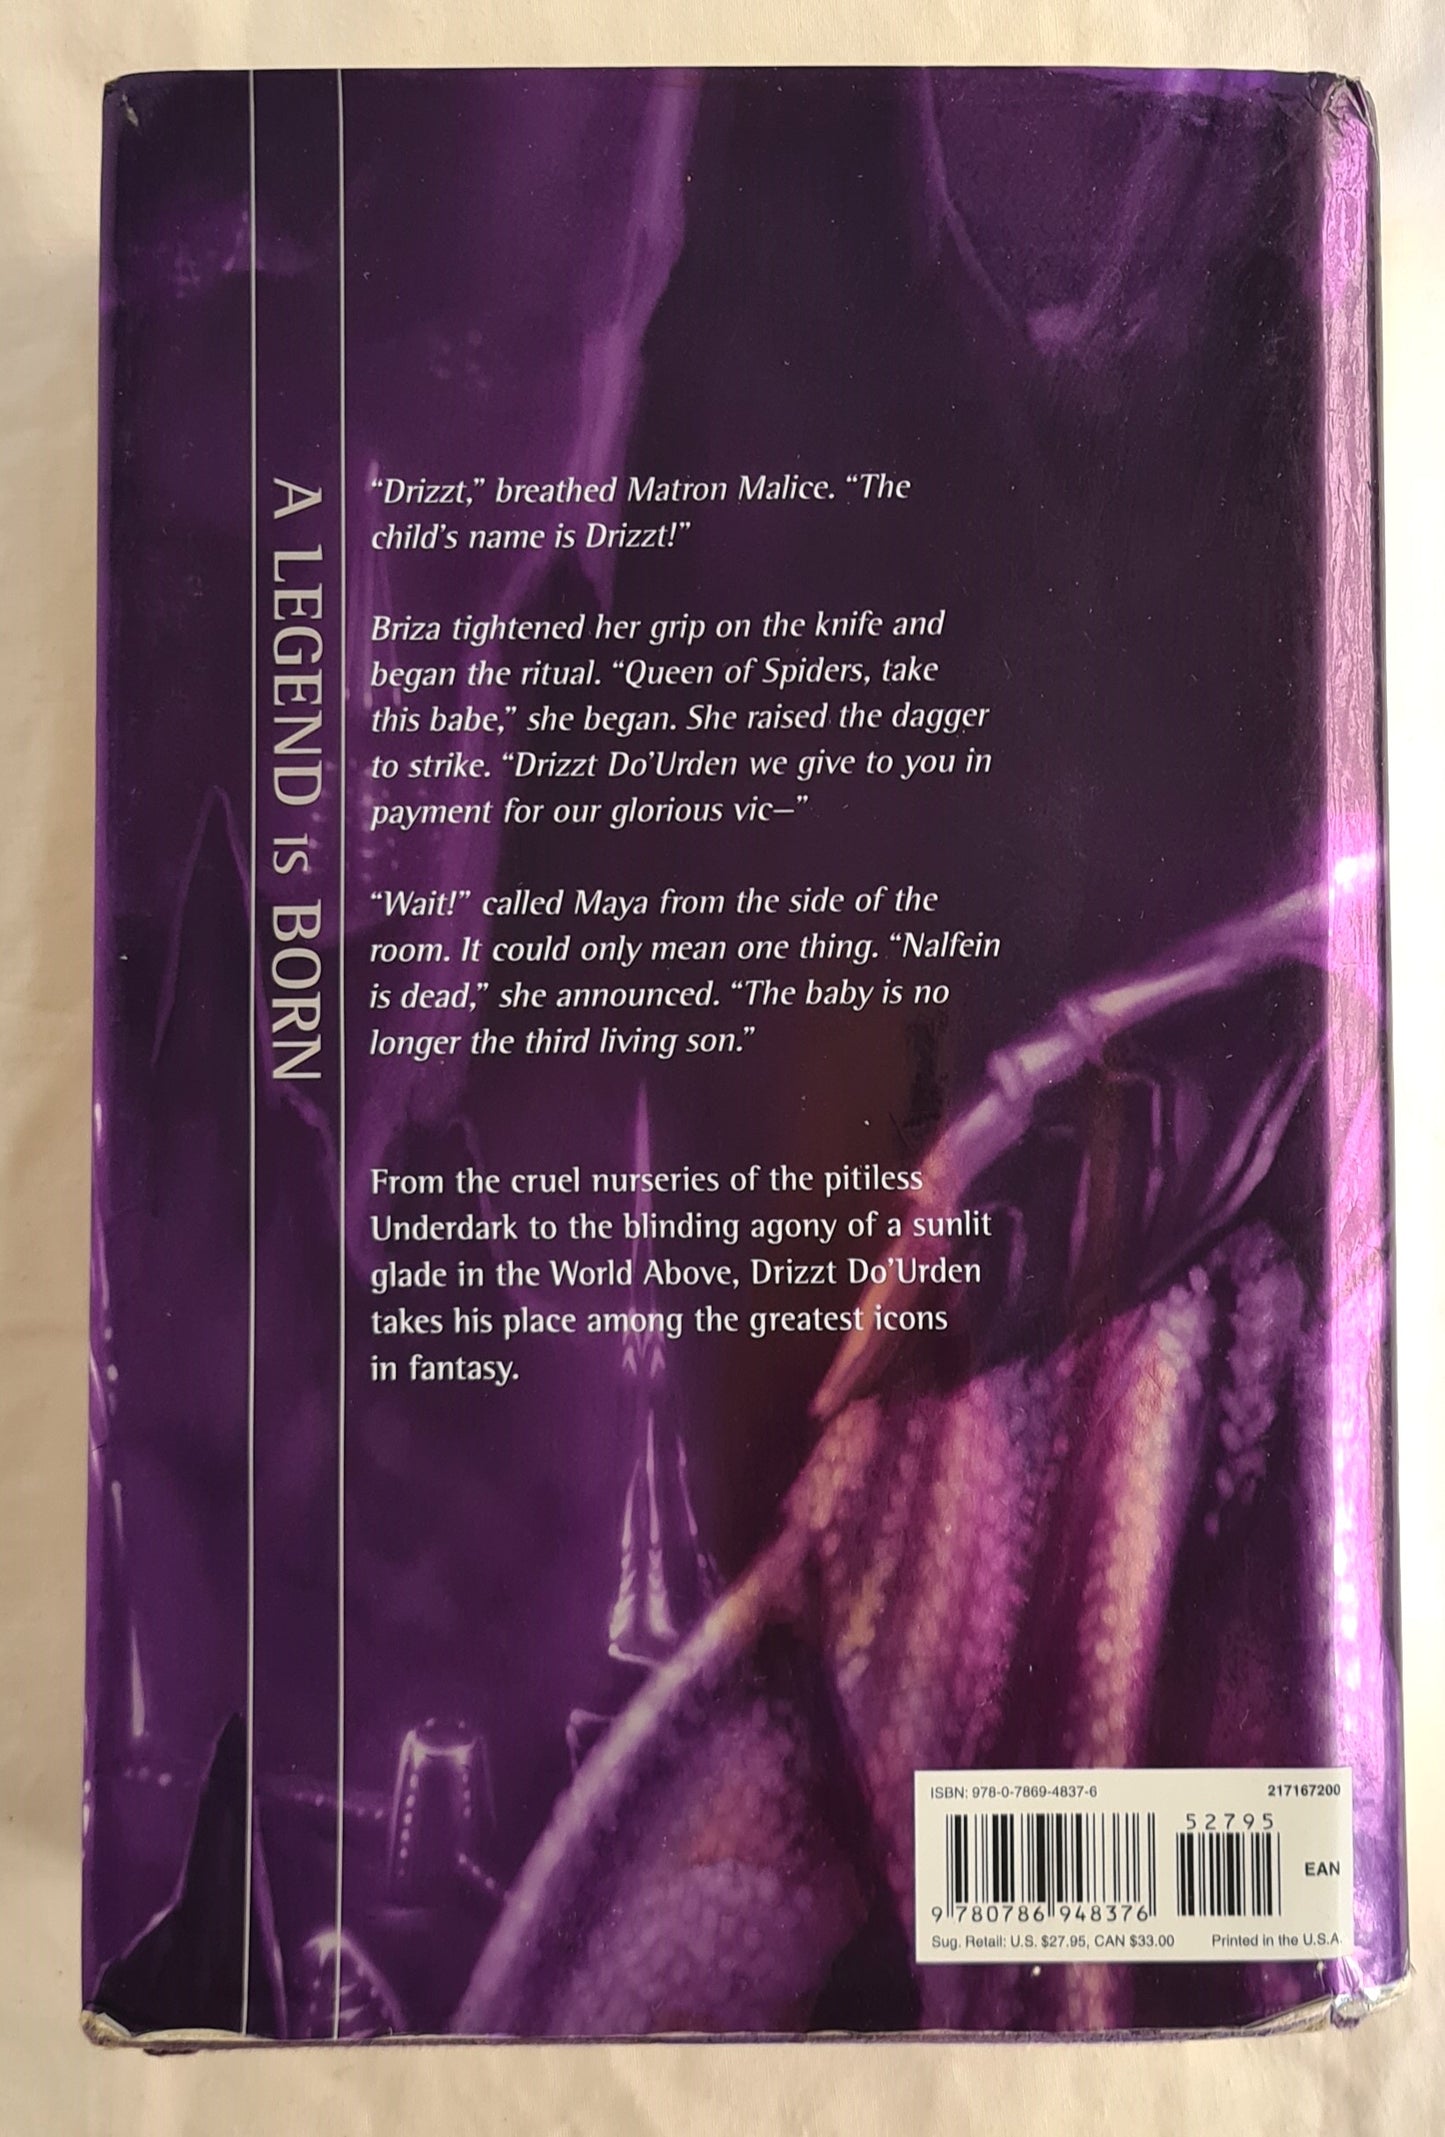 The Legend of Drizzt by R. A. Salvatore